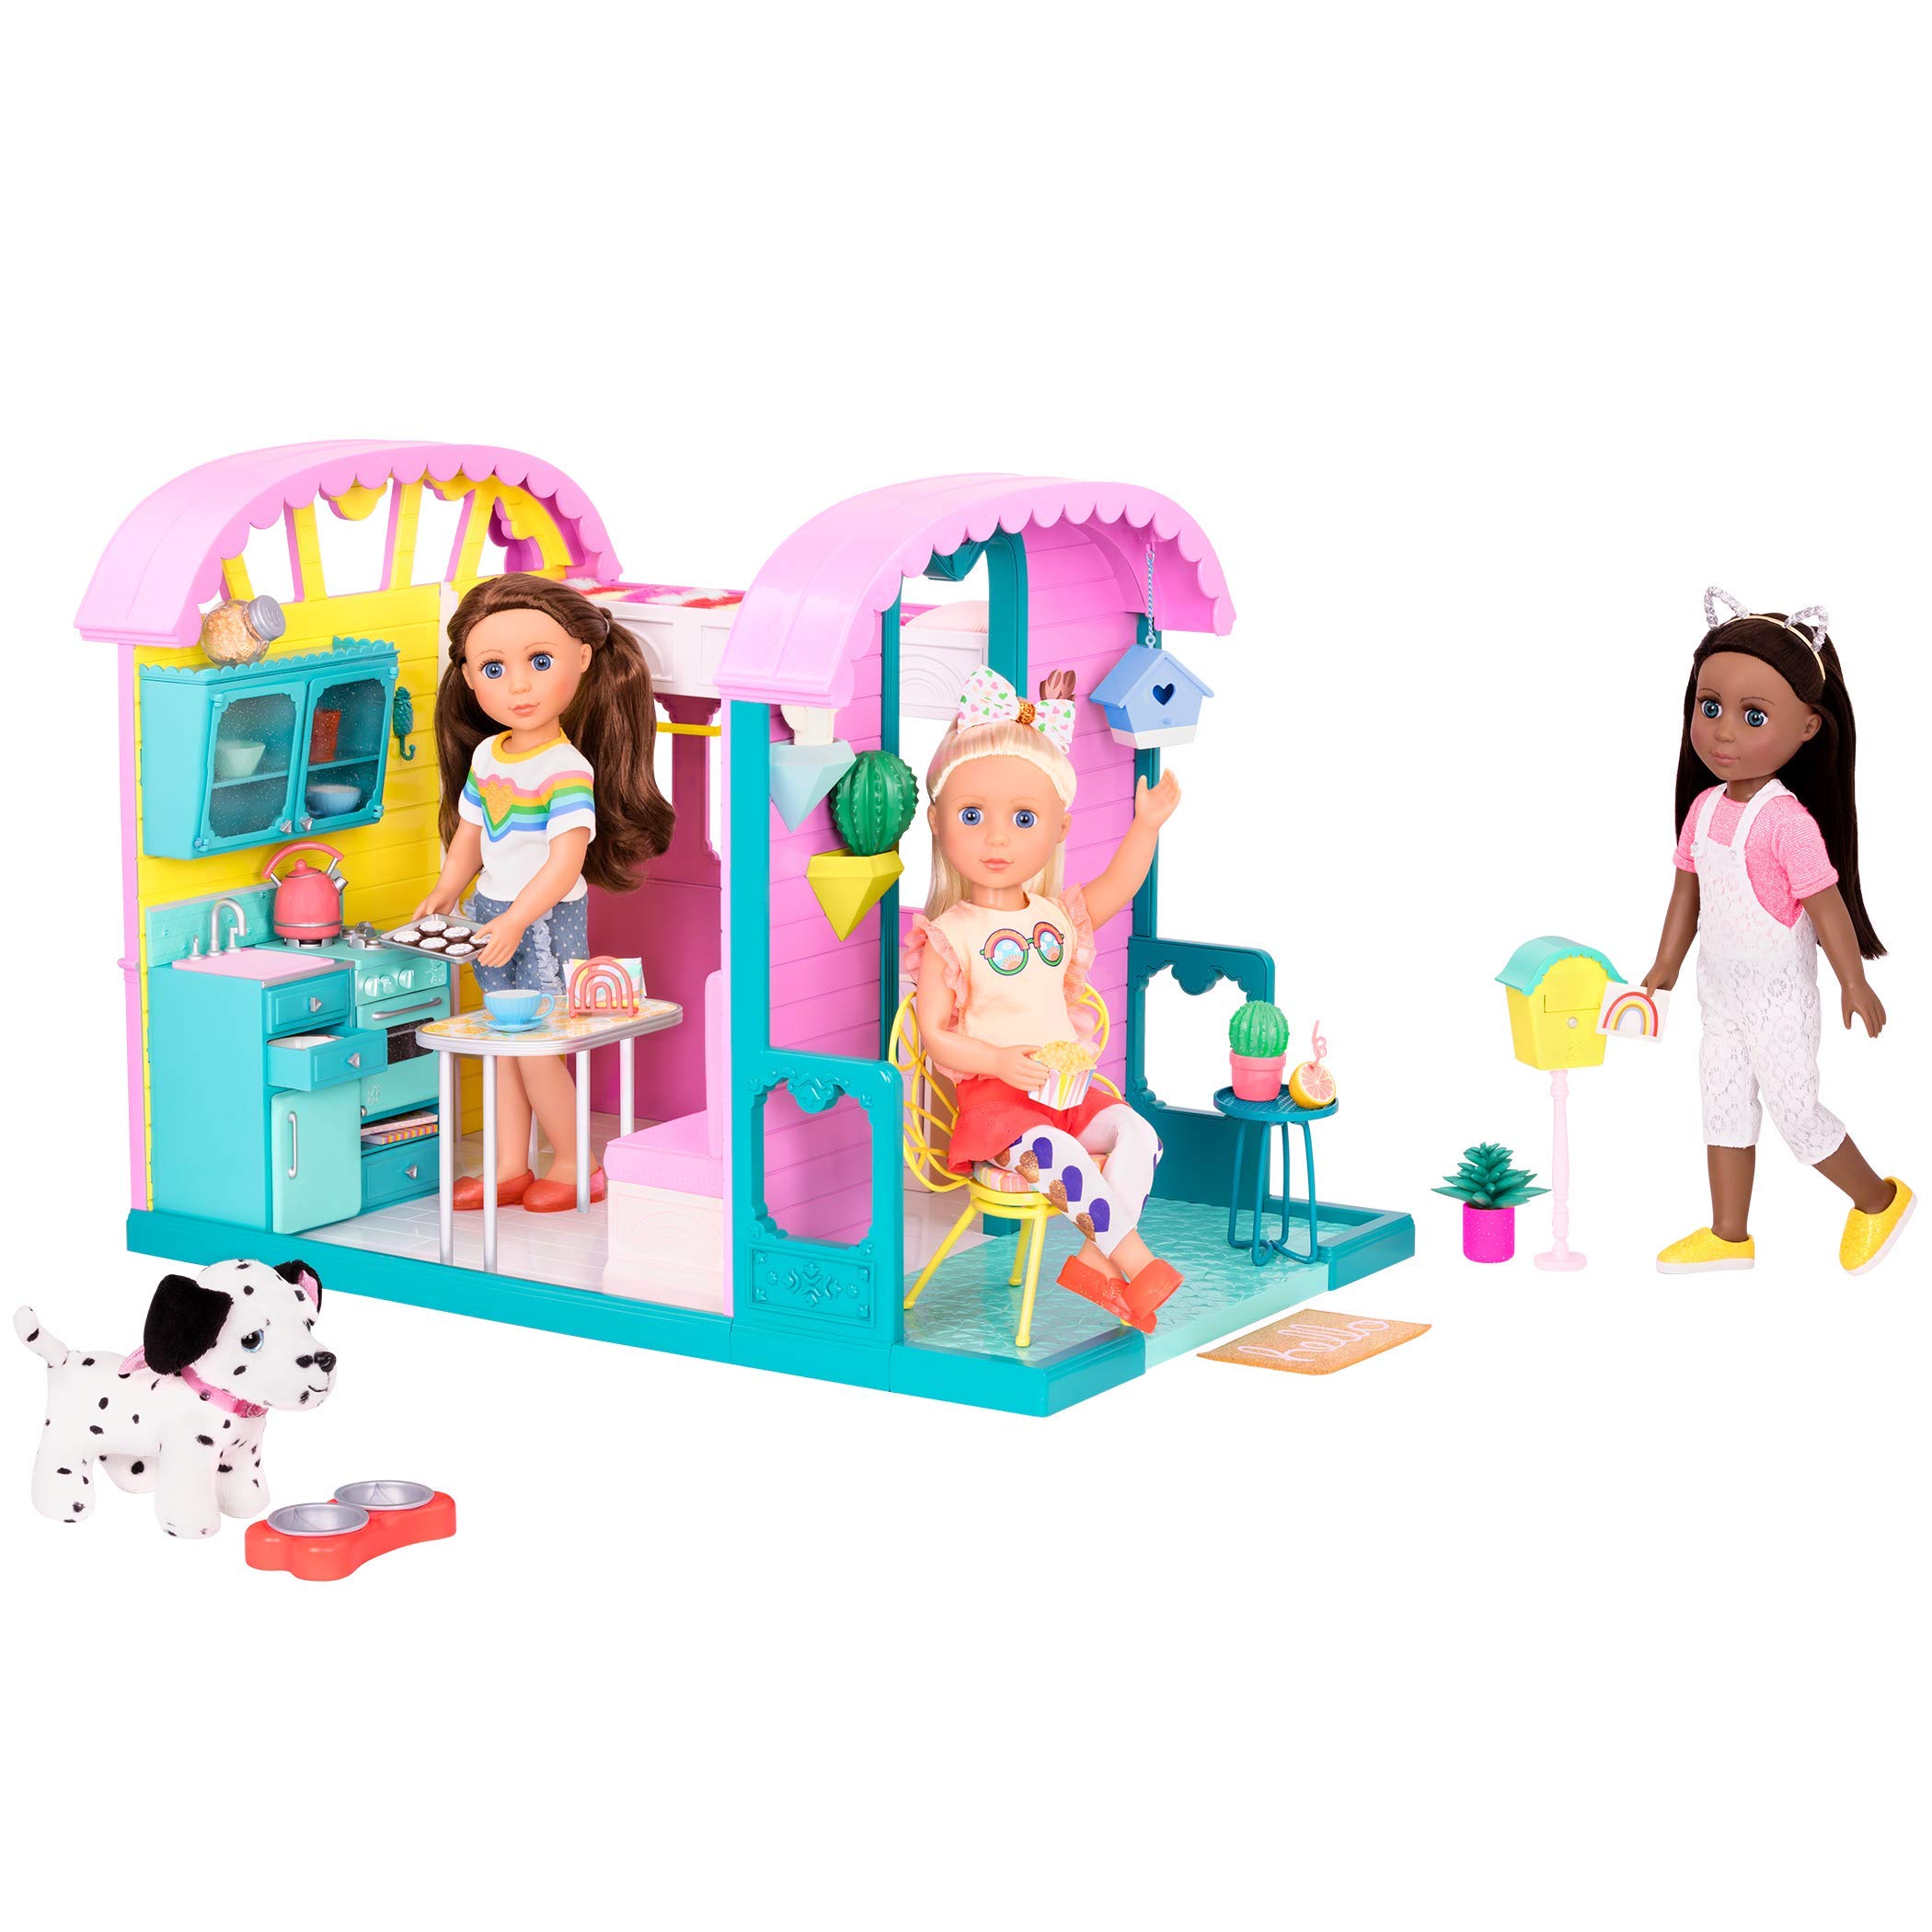 Glitter Girls – GG Doll House Playset with Furniture and Home Accessories – Kitchen, Oven, and Patio – 14-inch Doll Clothes and Accessories for Kids Ages 3 and Up